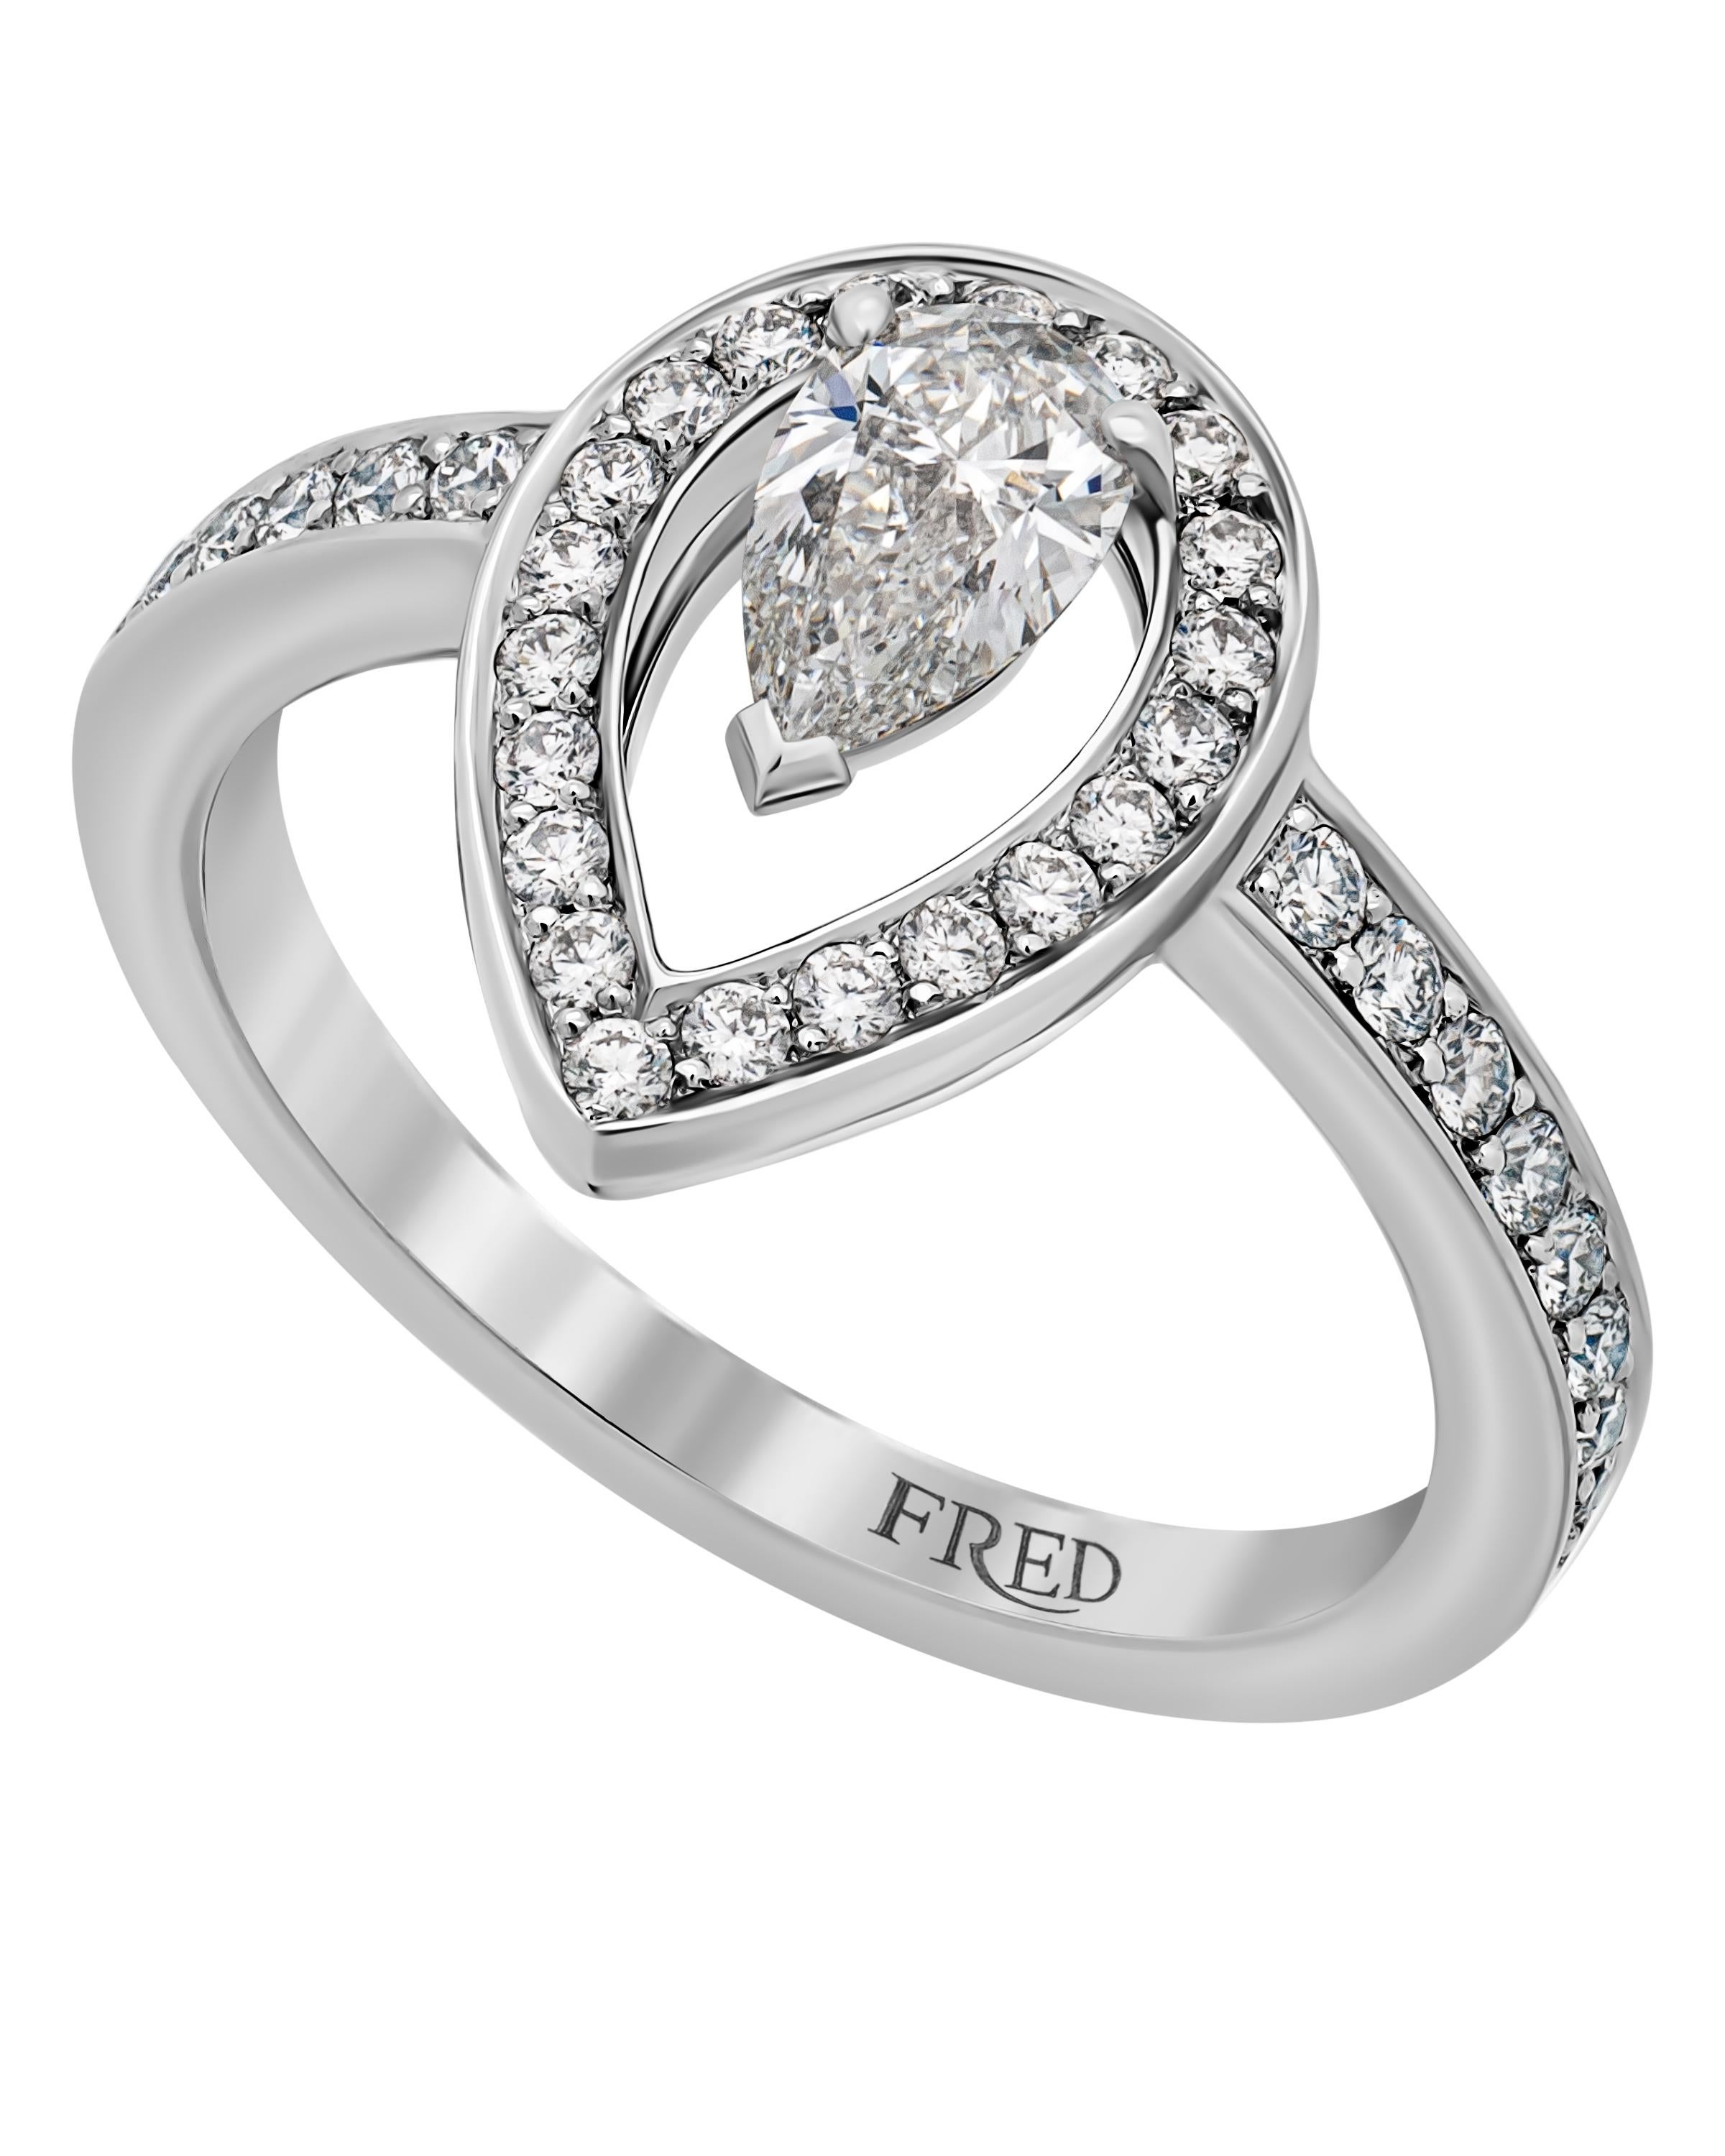 FRED Lovelight platinum engagement ring features a GIA certified 0.31ct. pear cut diamond center with color and clarity: E, VVS1 shimmering with 0.37ct. tw. pavé diamonds. The ring size is 5.25 (50.0). The weight is 4.13g.
